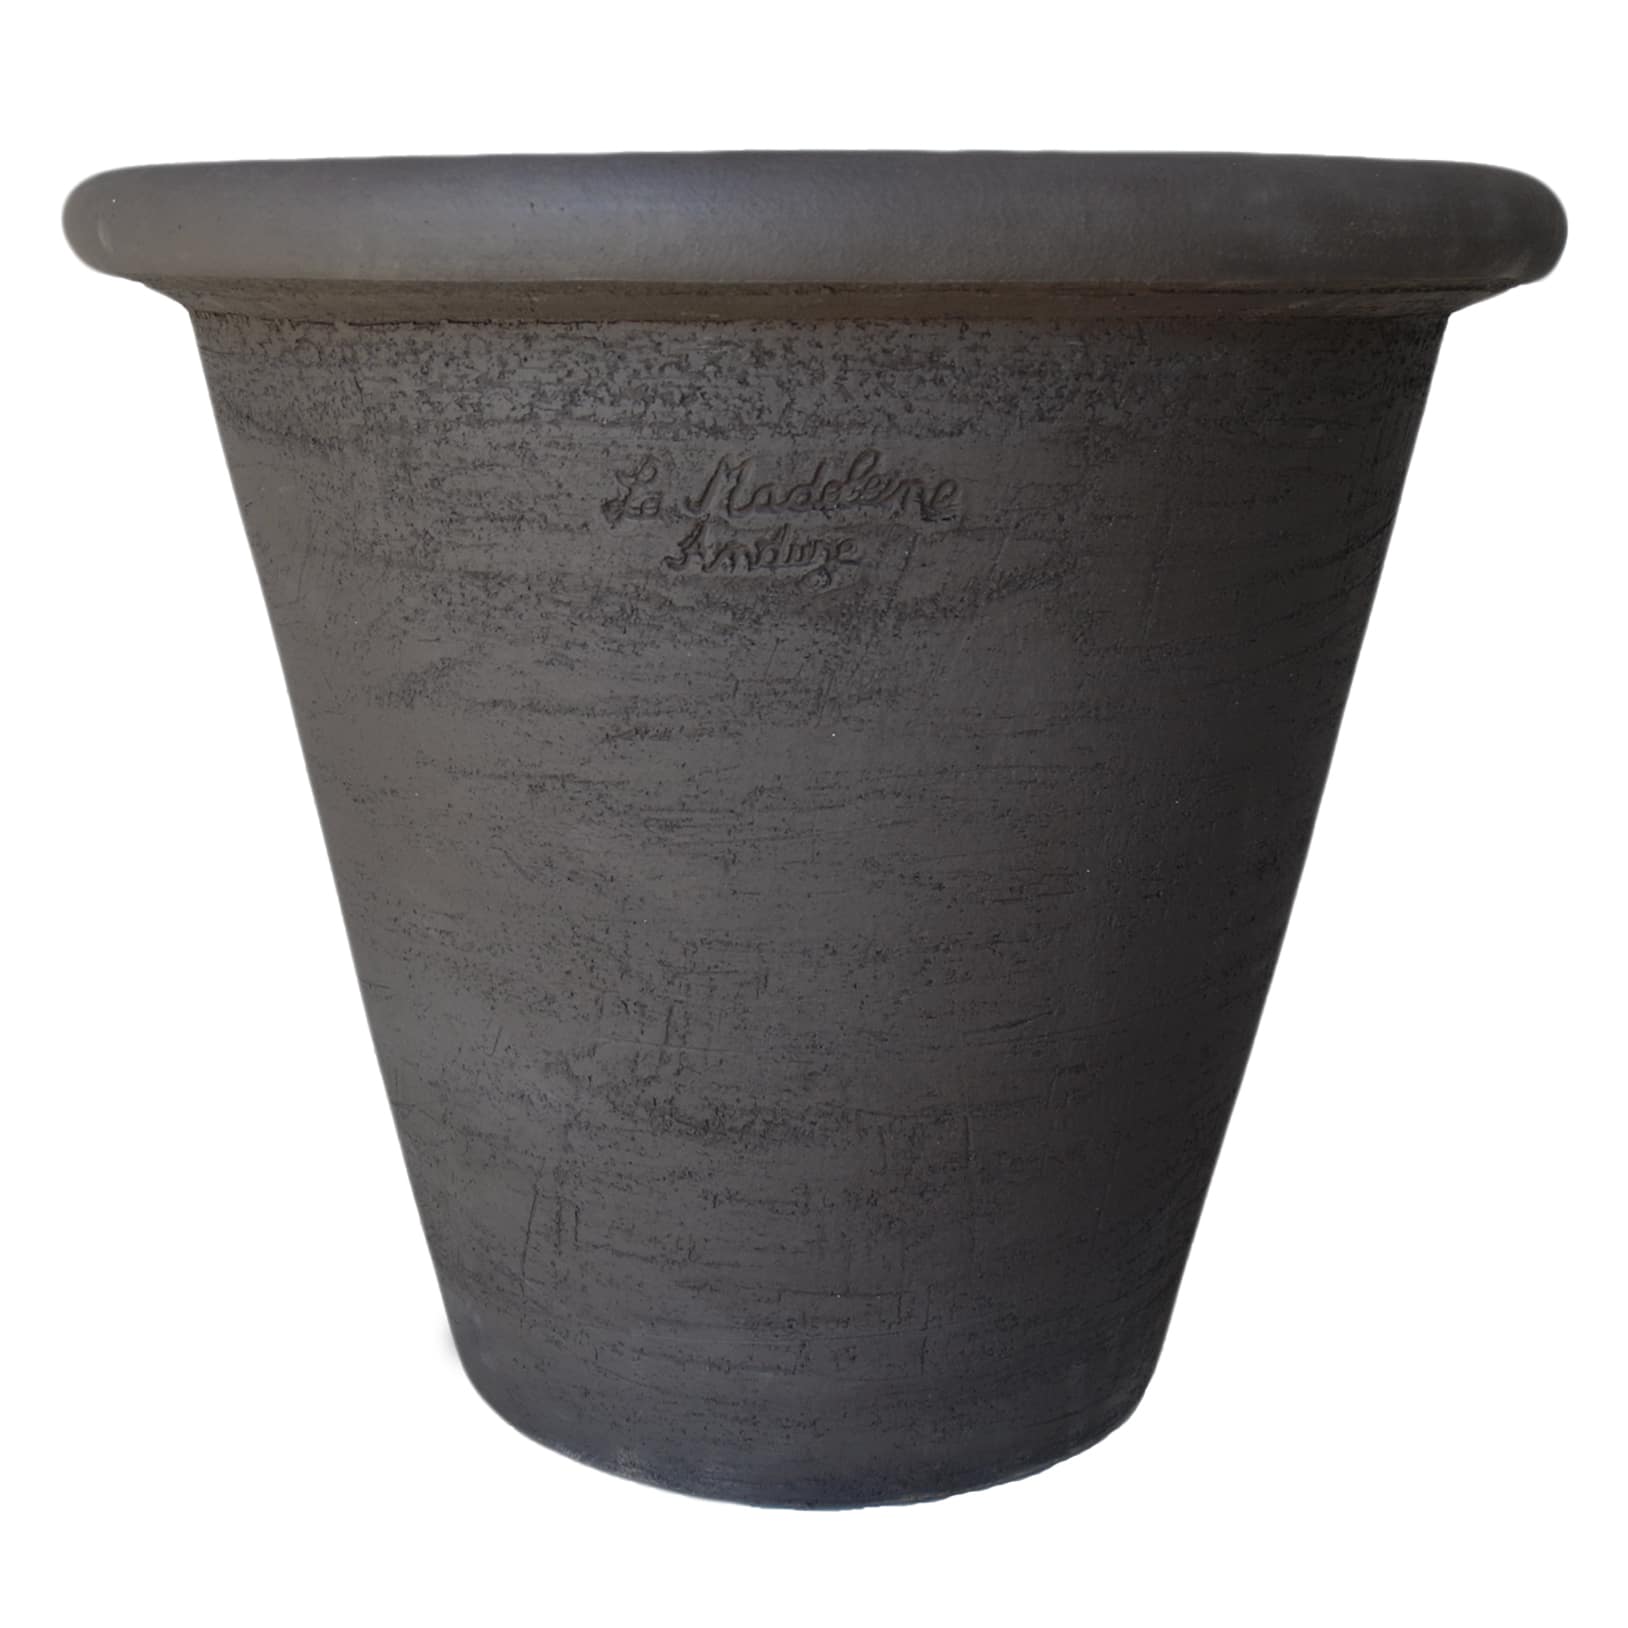 cuvier-rond-french-anduze-rolled-rim-planter-black-terracotta